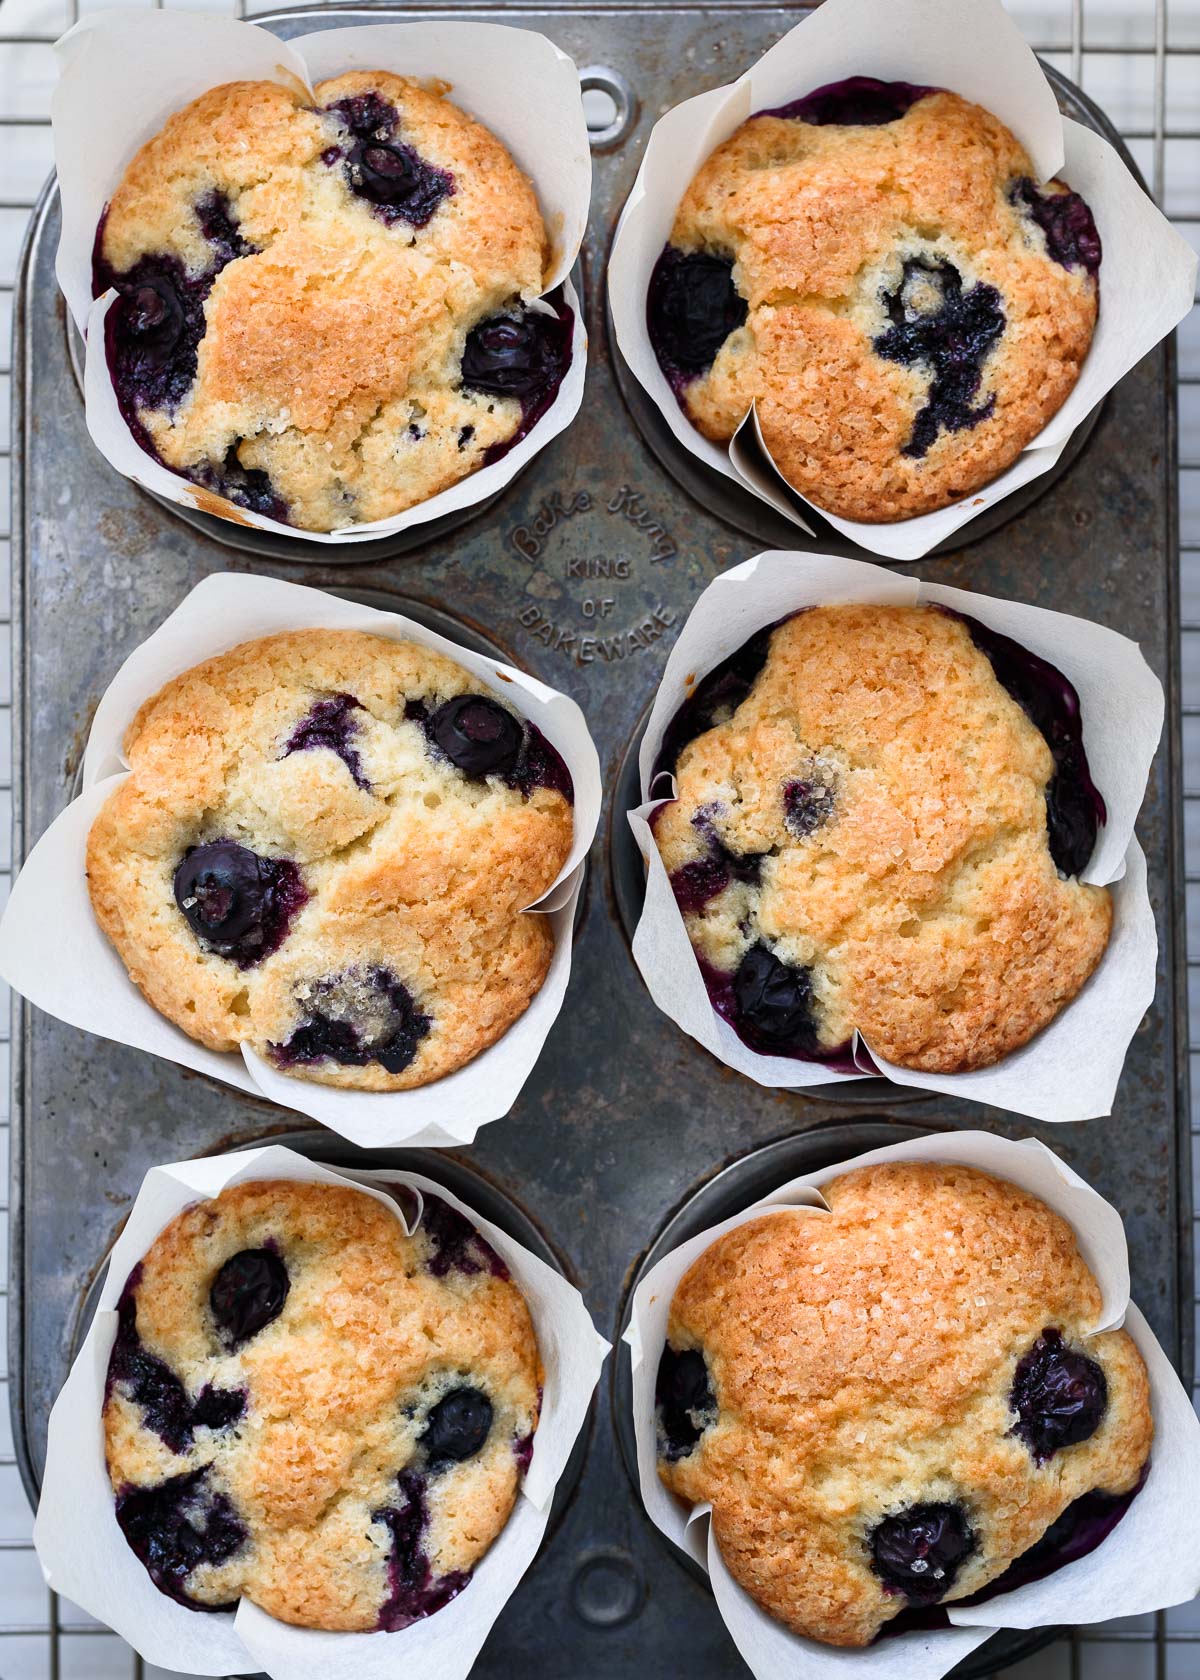 Lemon blueberry muffins with white tulip liners in a vintage muffin tin.